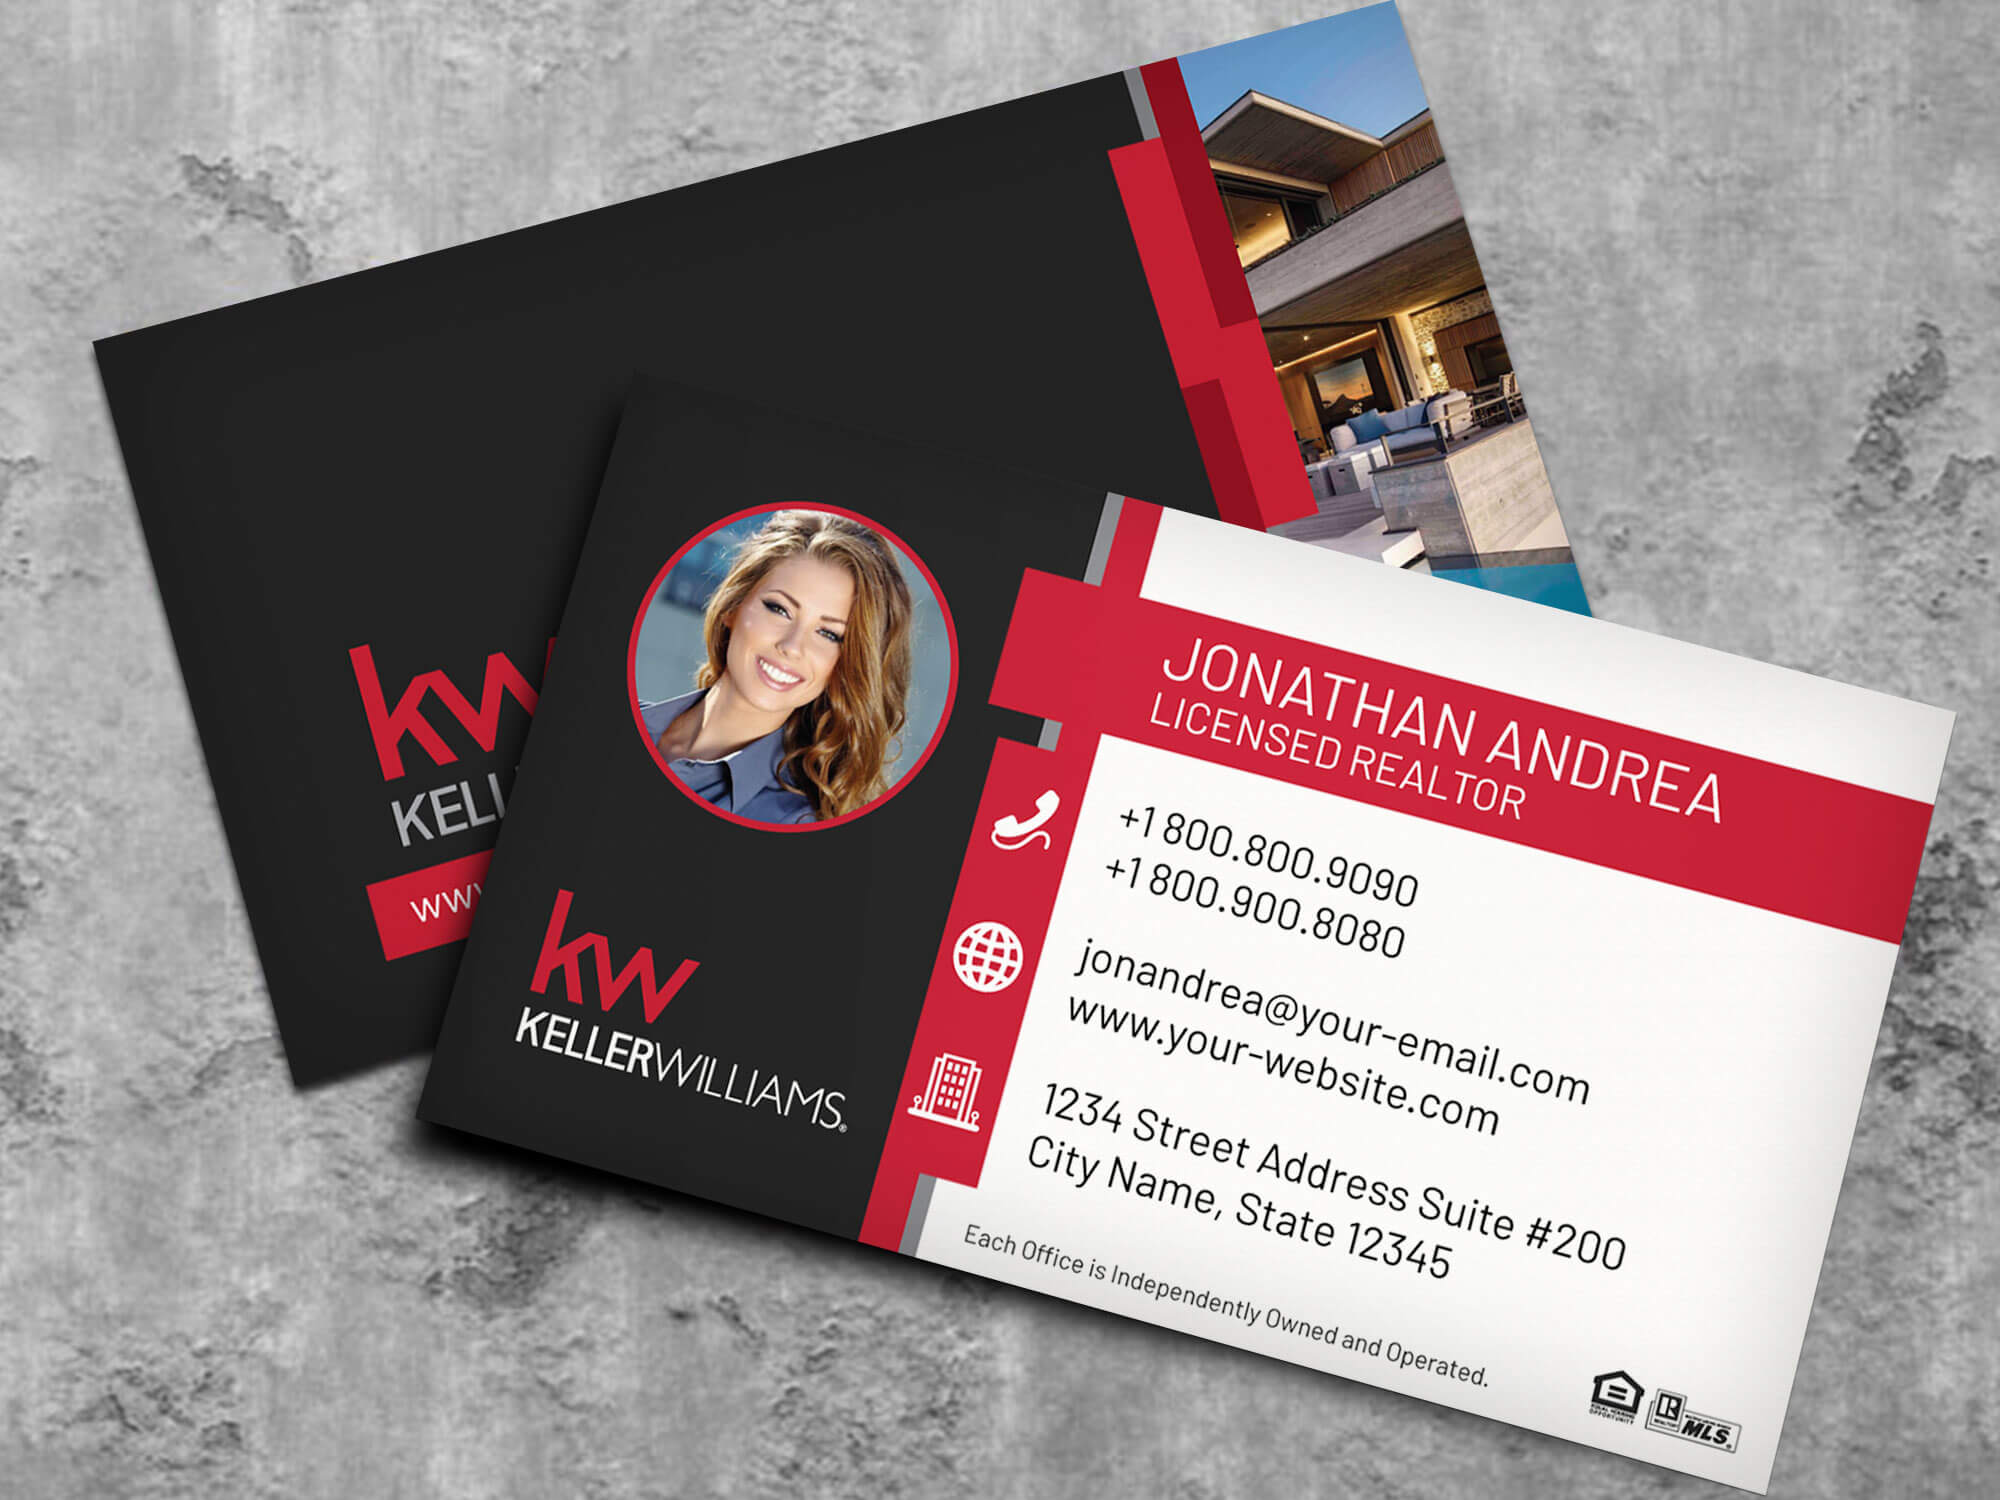 Keller Williams Business Card Template Bc19702Kw – Nusacreative Within Keller Williams Business Card Templates